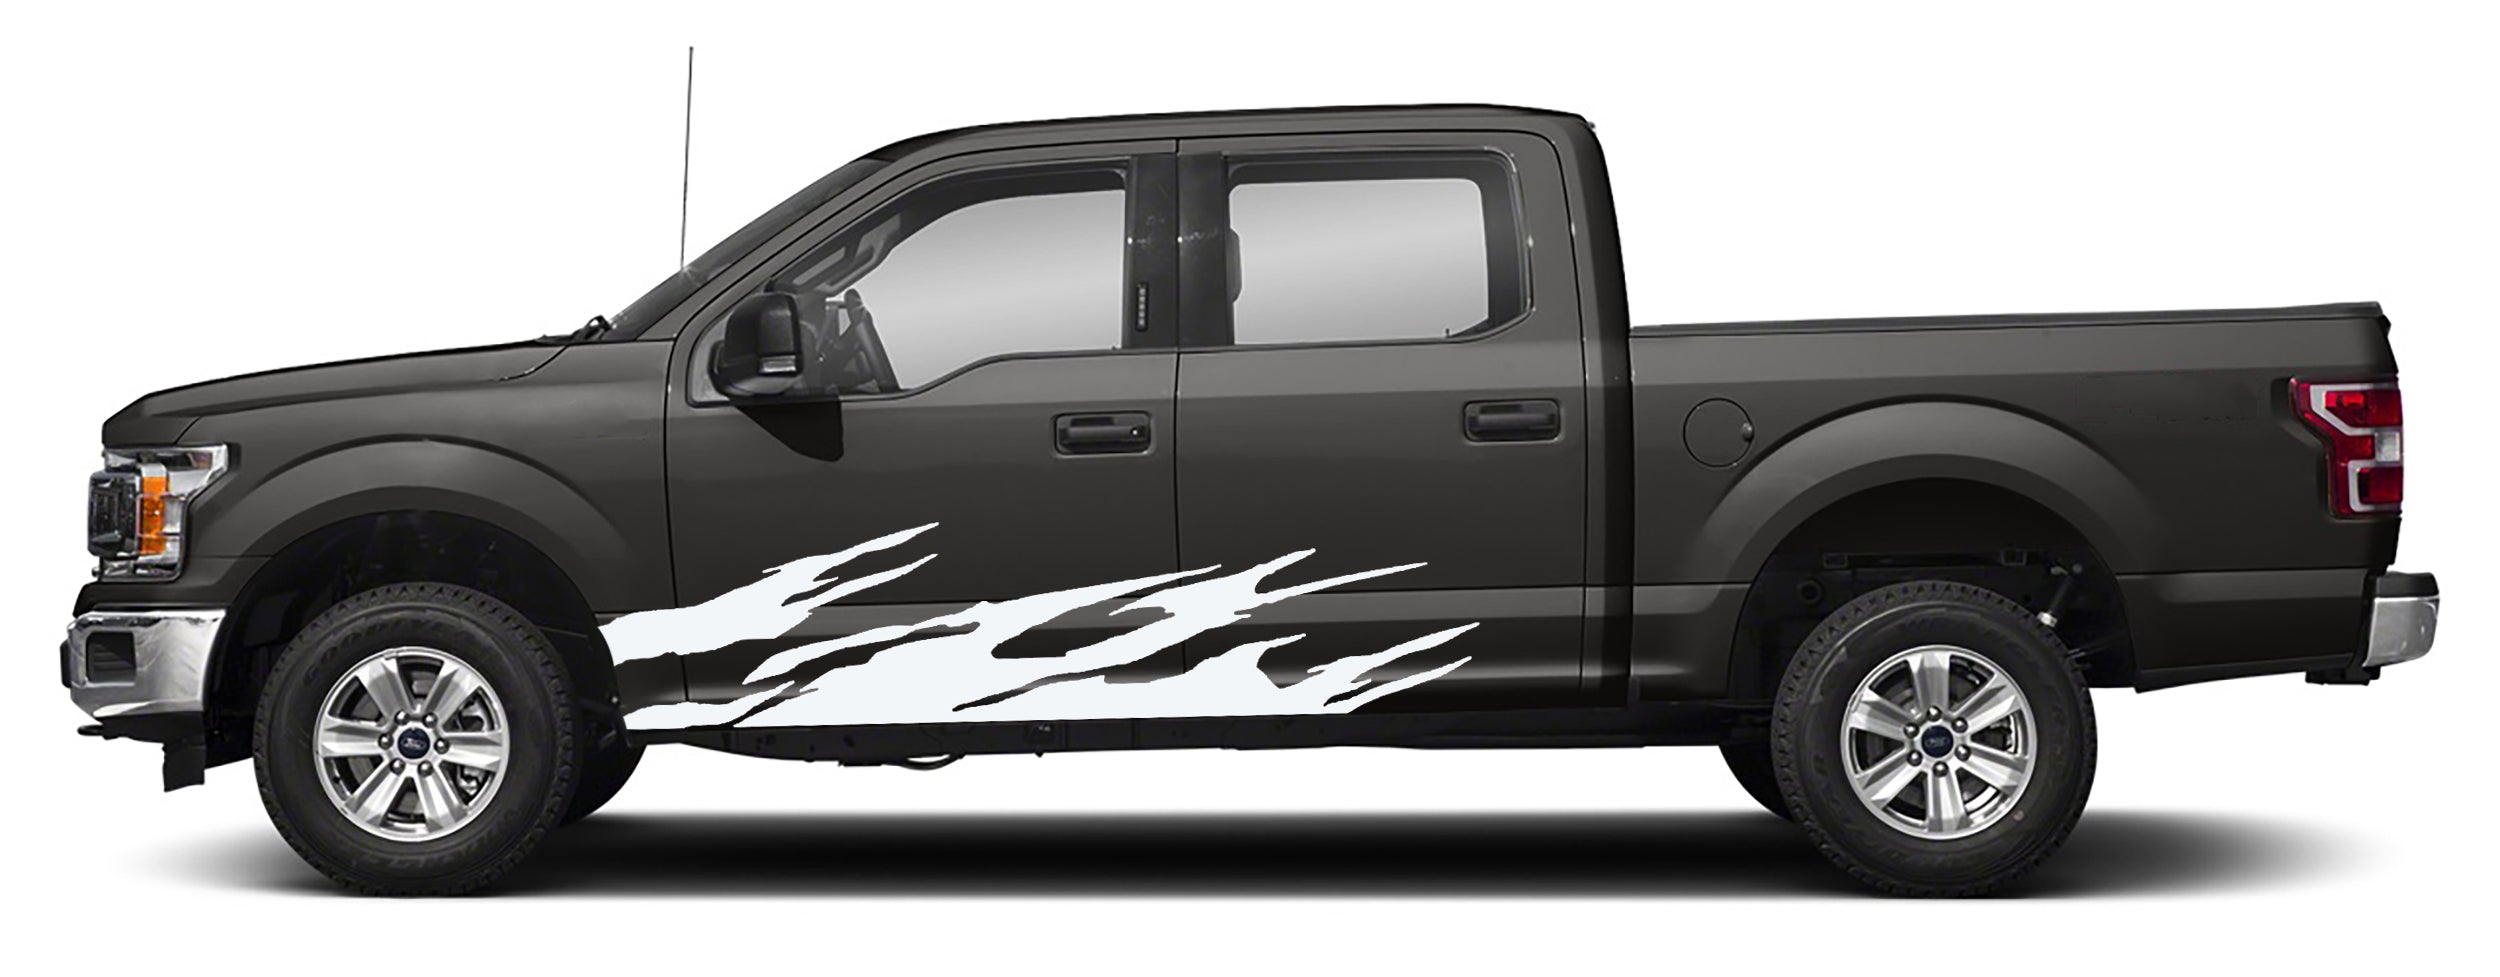 Brush Style Rocker Panel Stripes for ford f-150 2015 to 2020 models